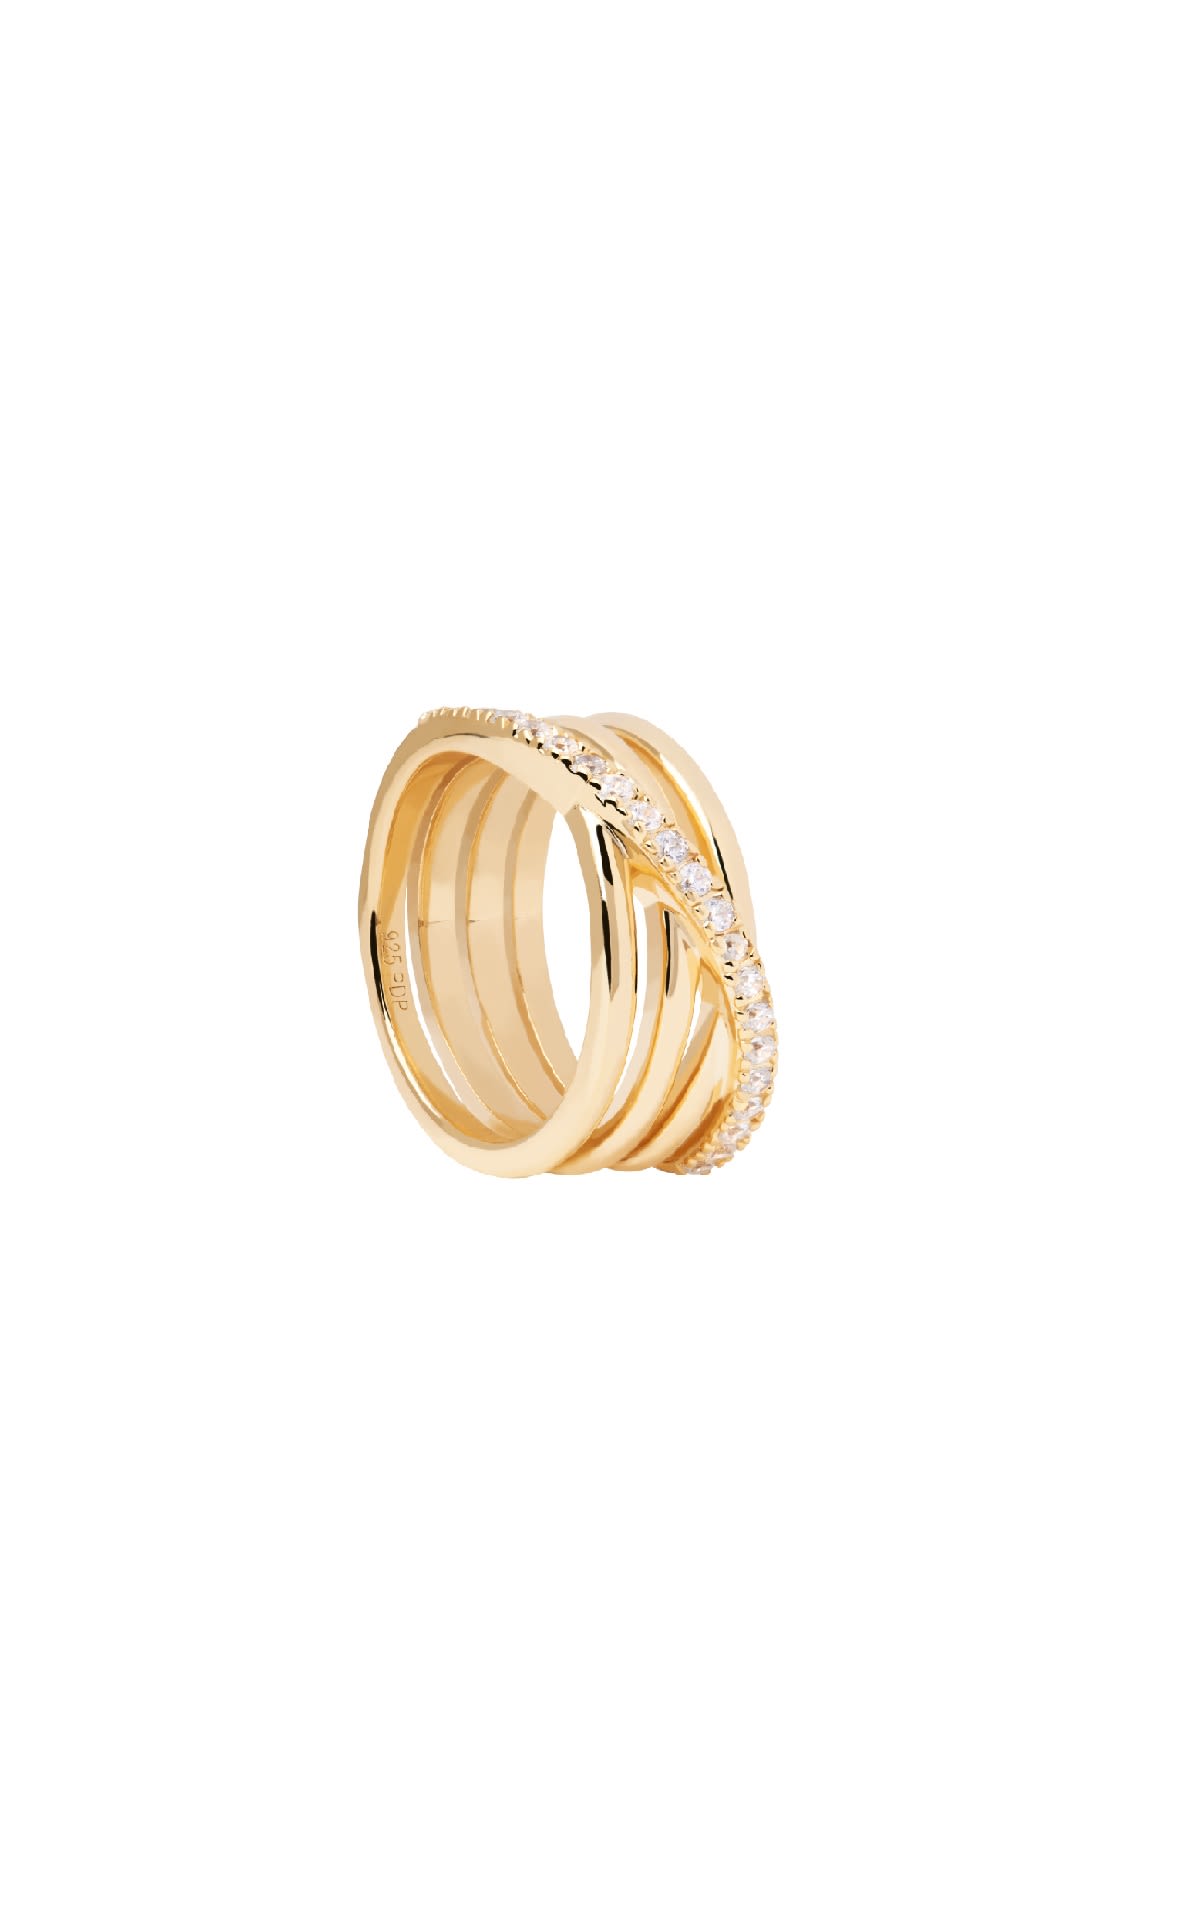 Gold ring with diamond detail PDPAOLA